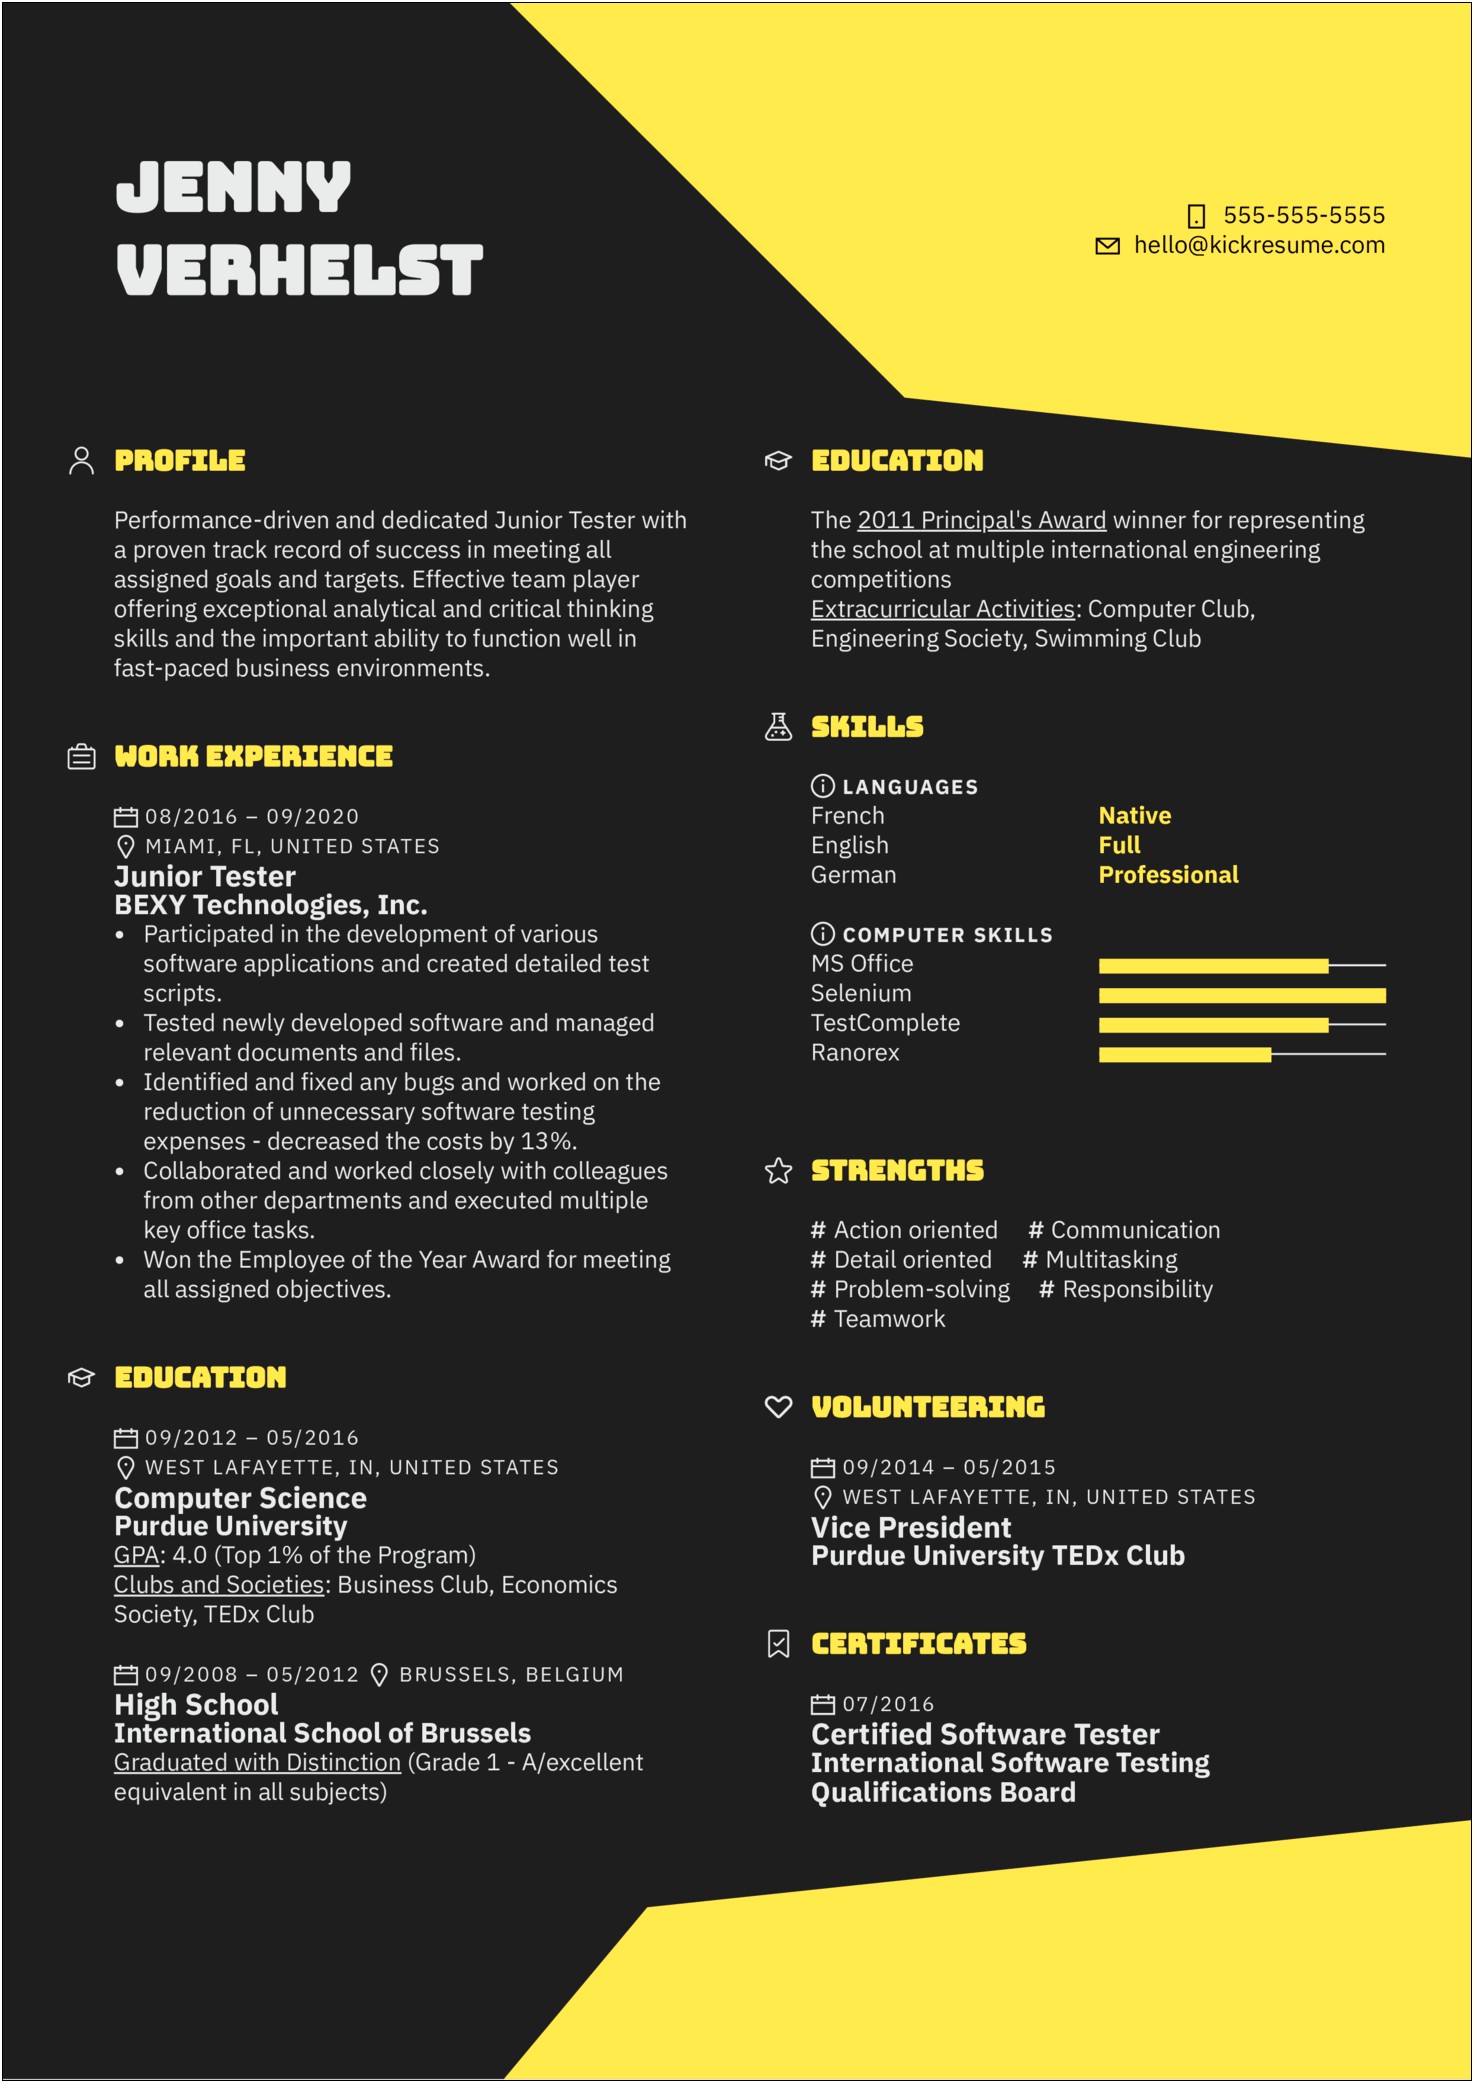 Sample Resume Of A Tester